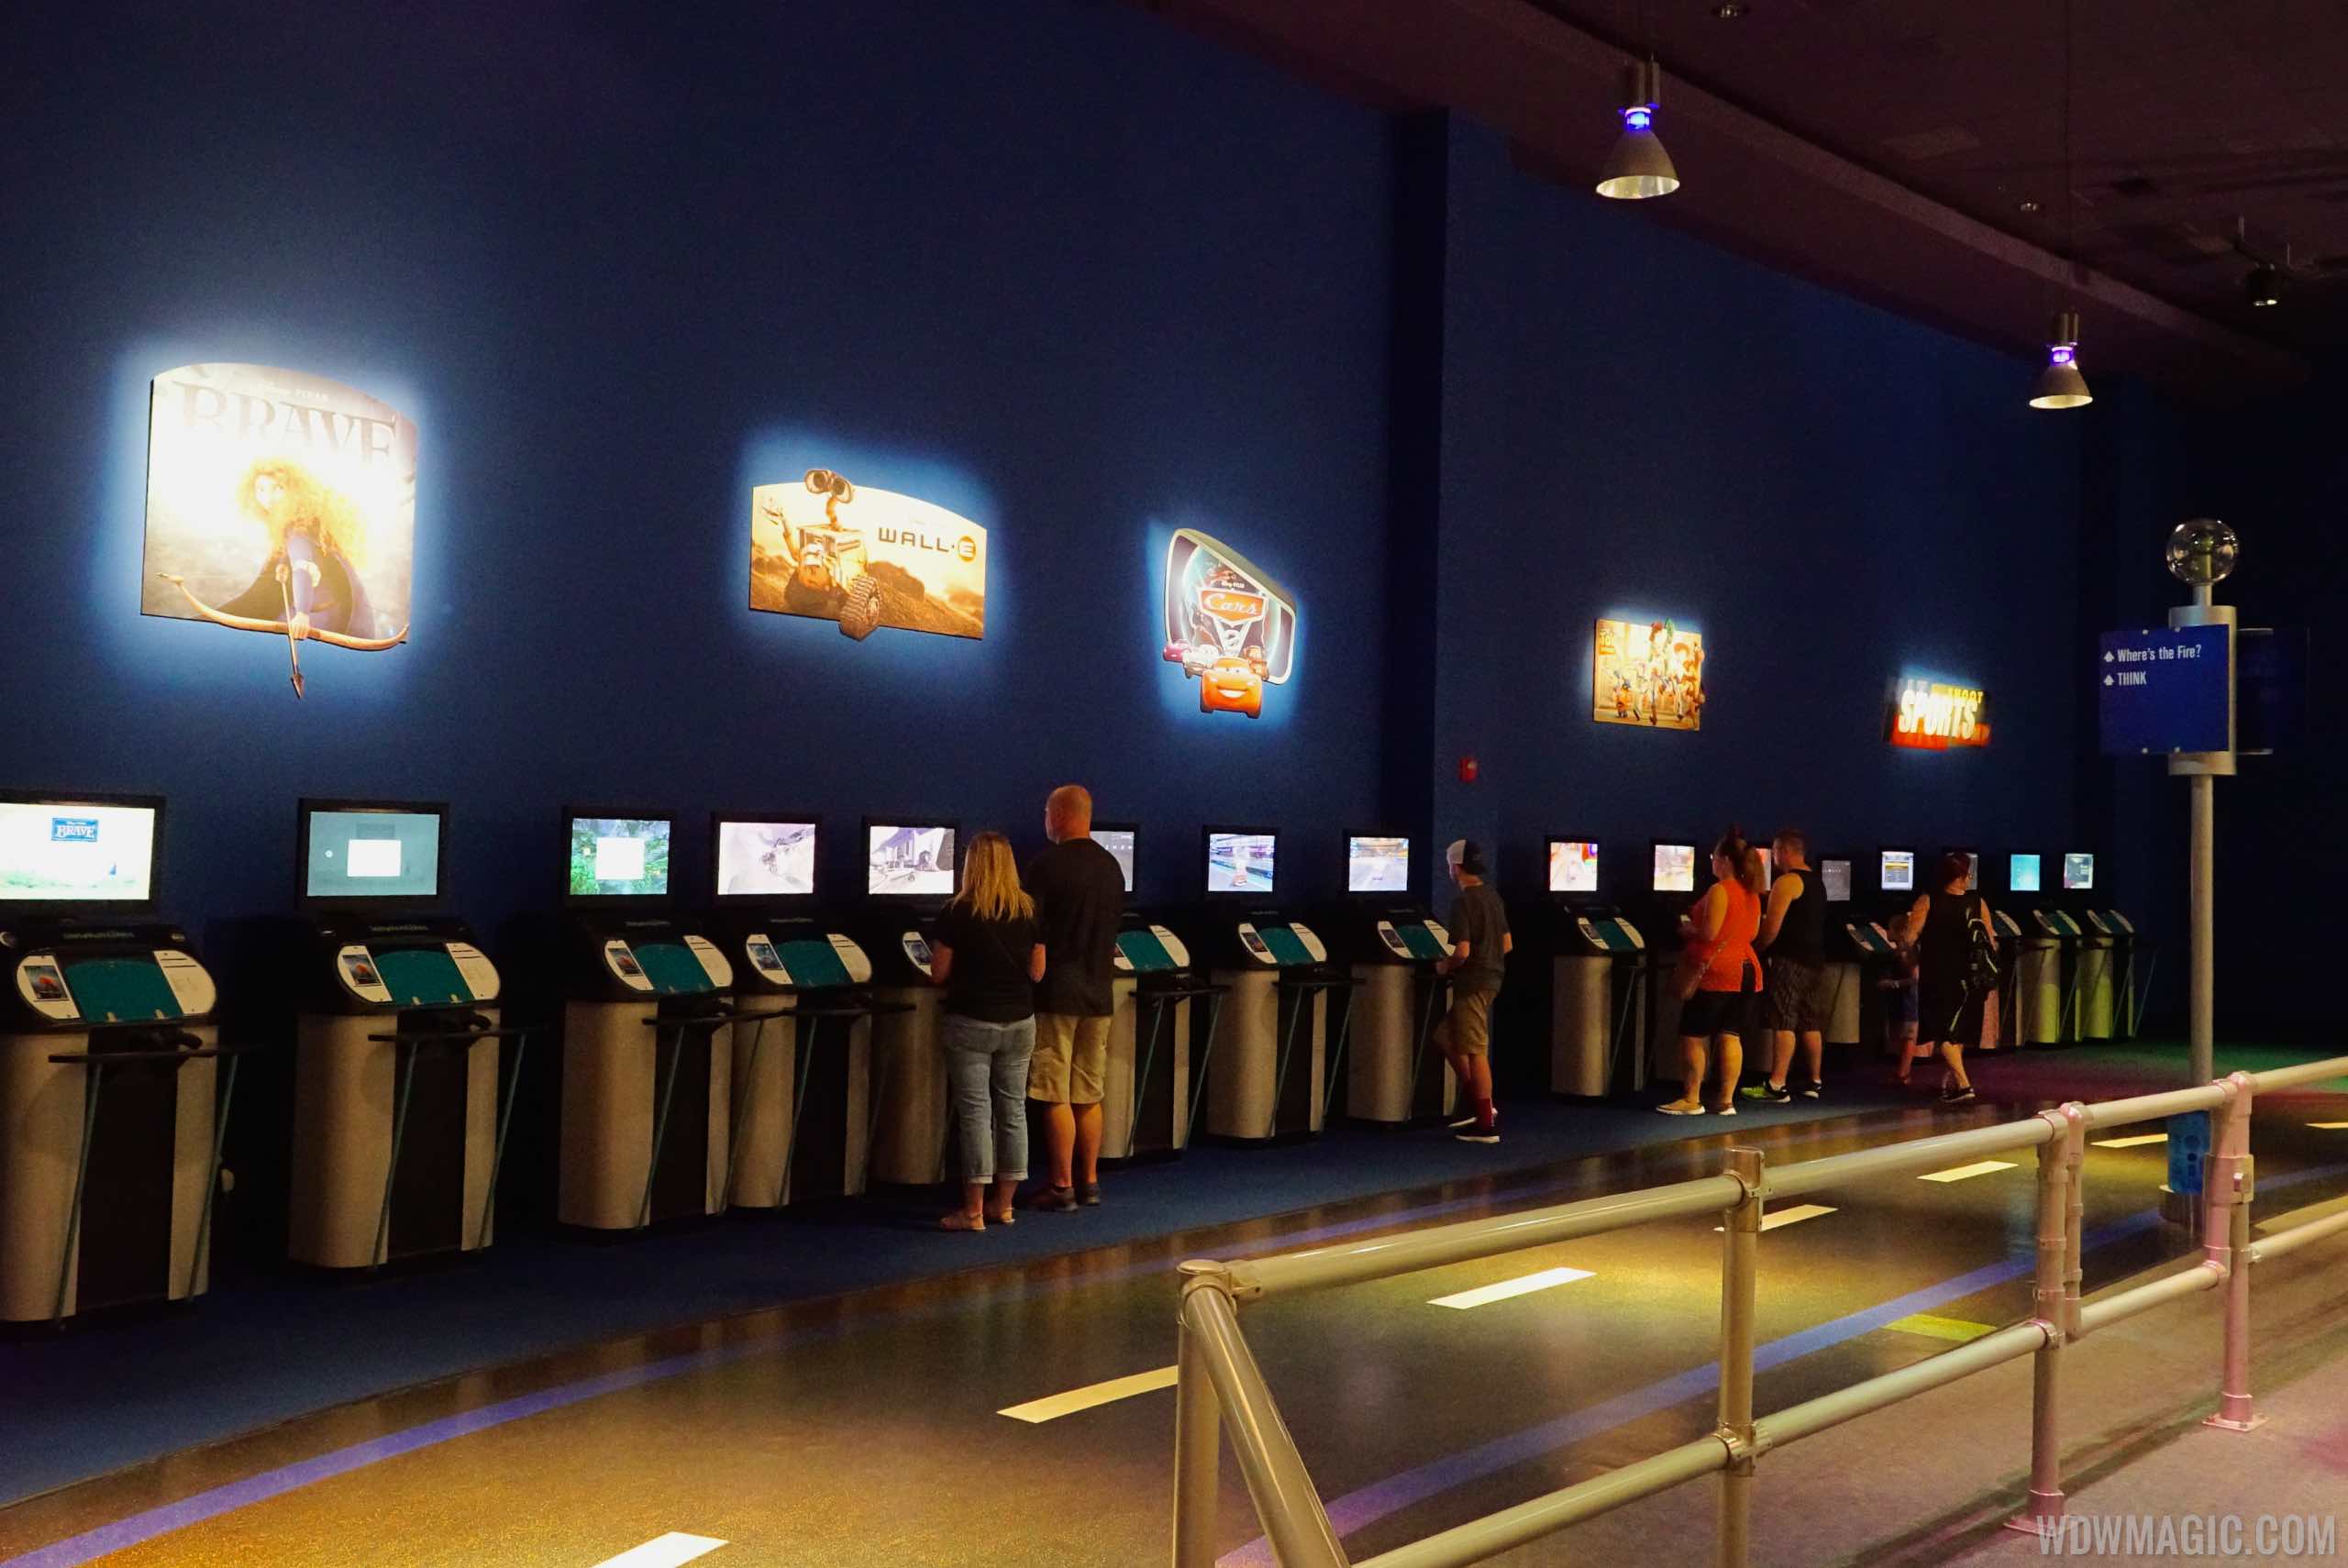 Innoventions Habit Heroes closes for rework